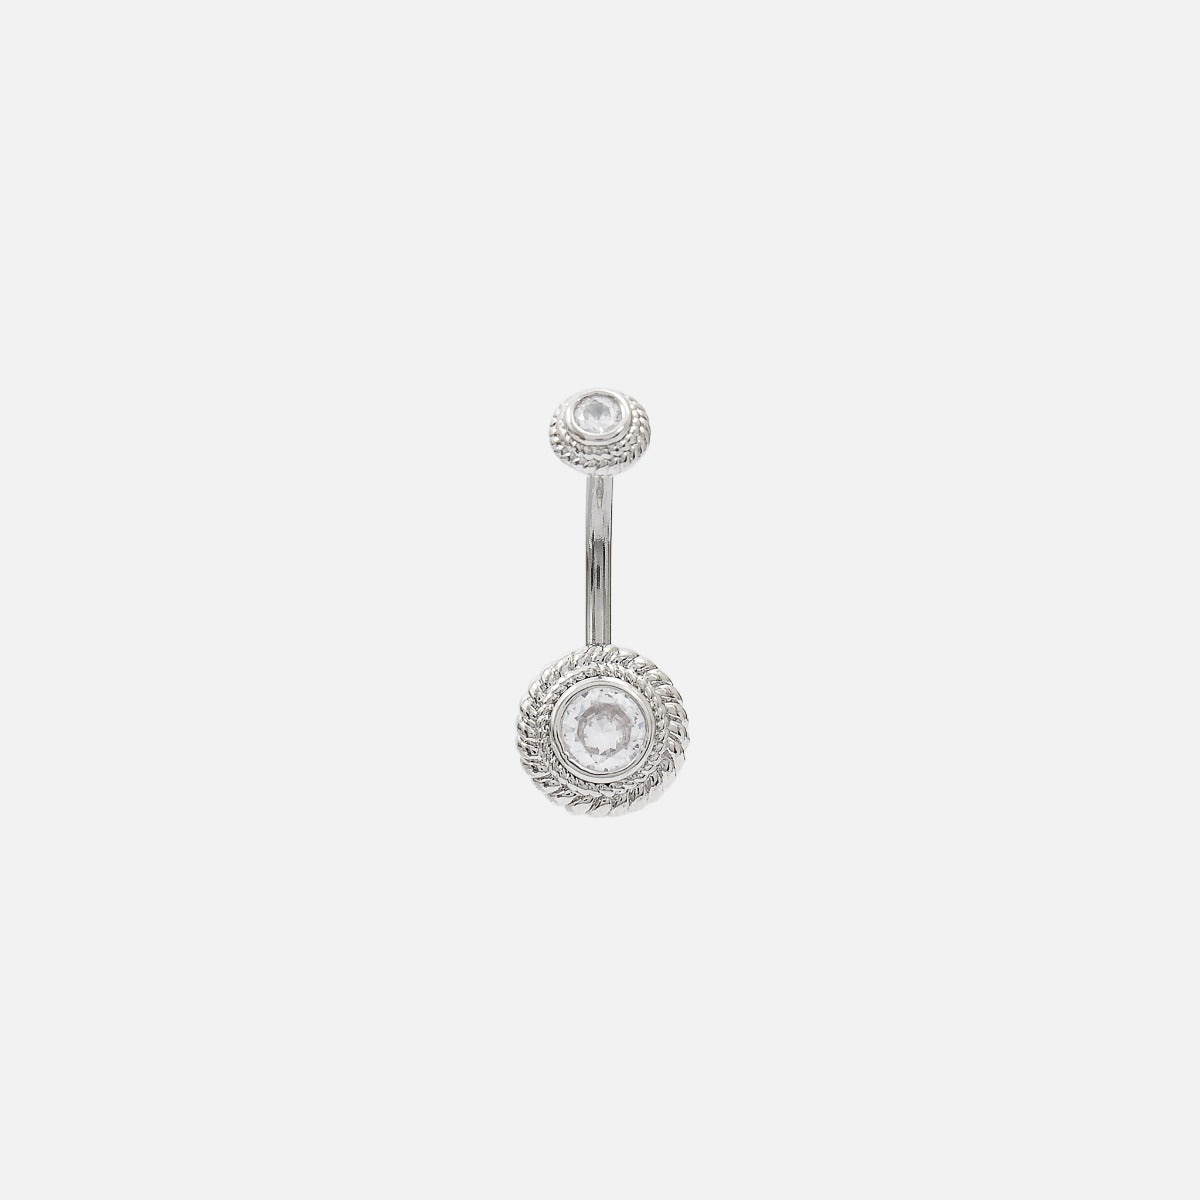 Stainless steel belly button ring with stone